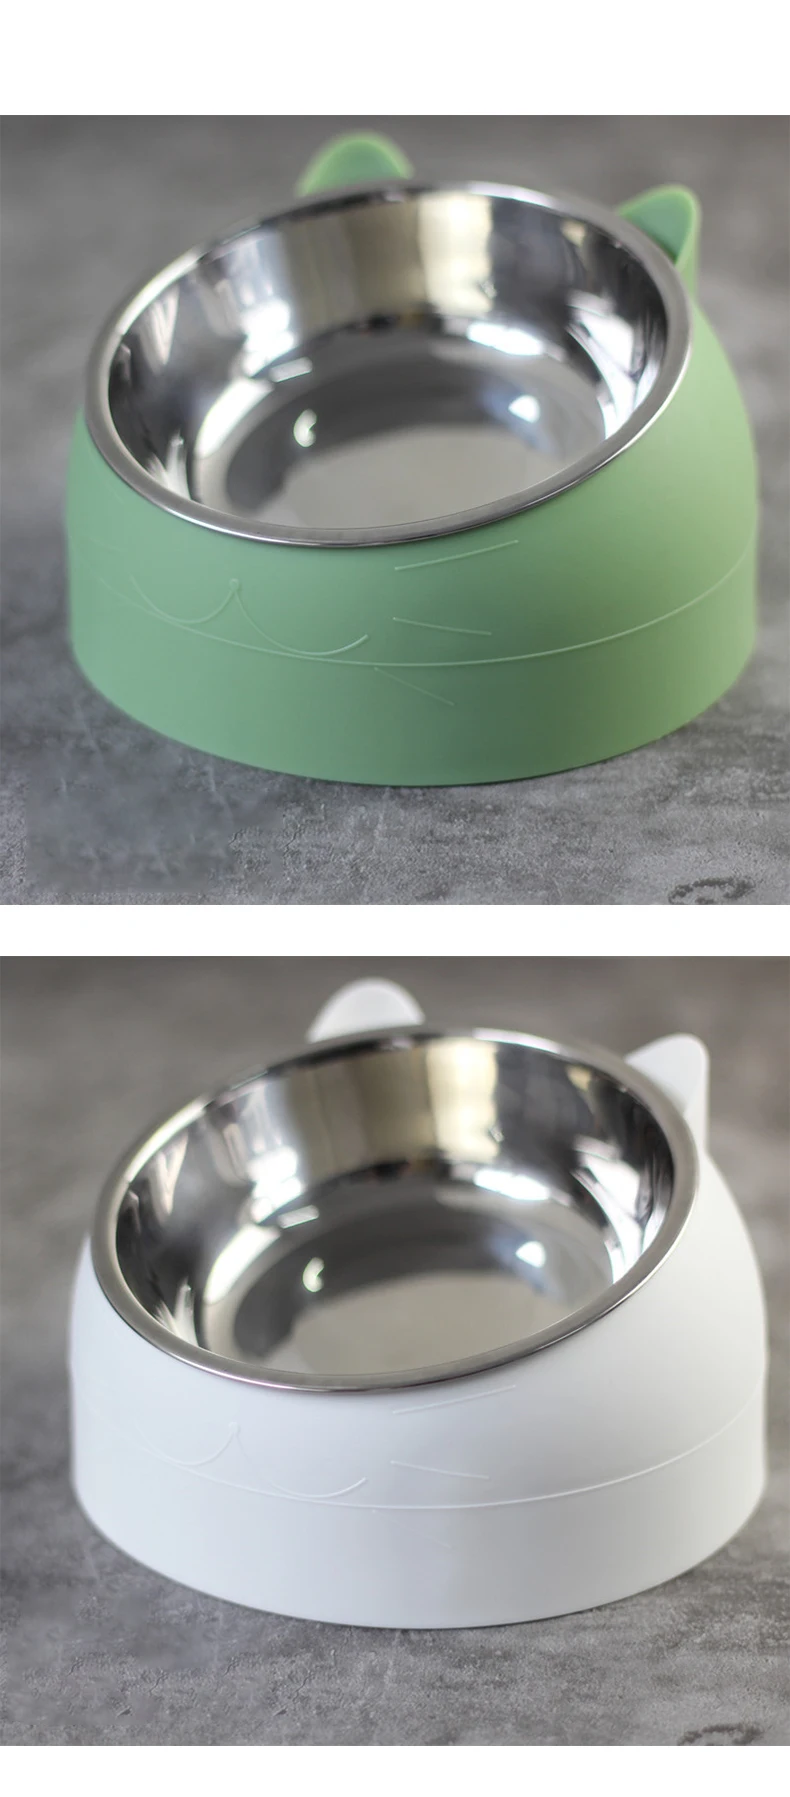 Pet Cat Bowl Stainless Steel 15 Degrees Tilted Safeguard Neck Dog Cat Feeder Pet Food Water Feeding Bowl For Puppy Cat Supplies